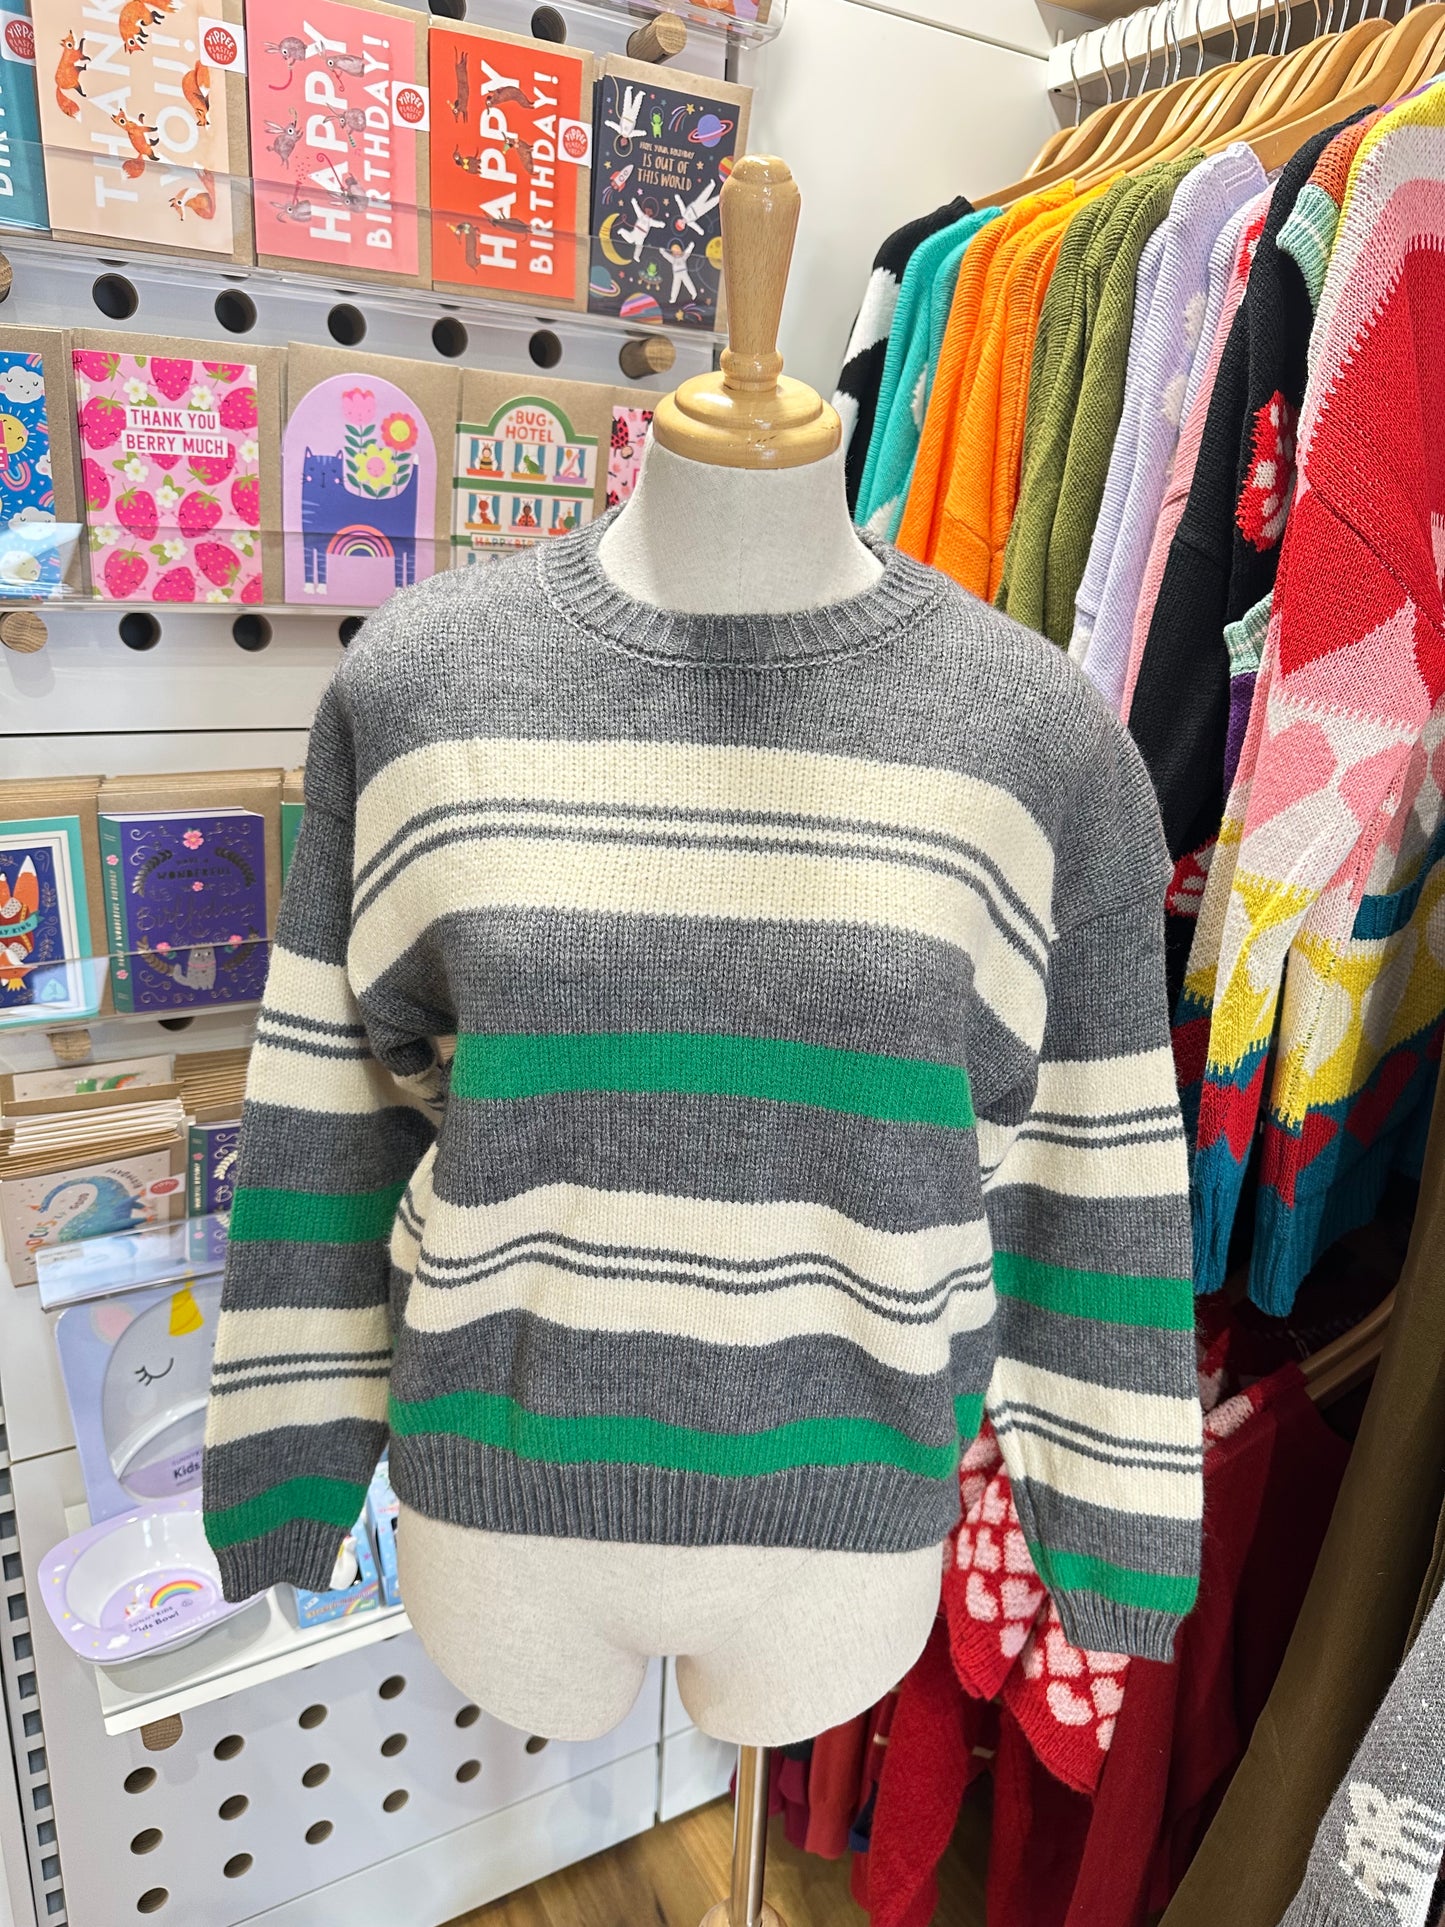 Another striped pullover